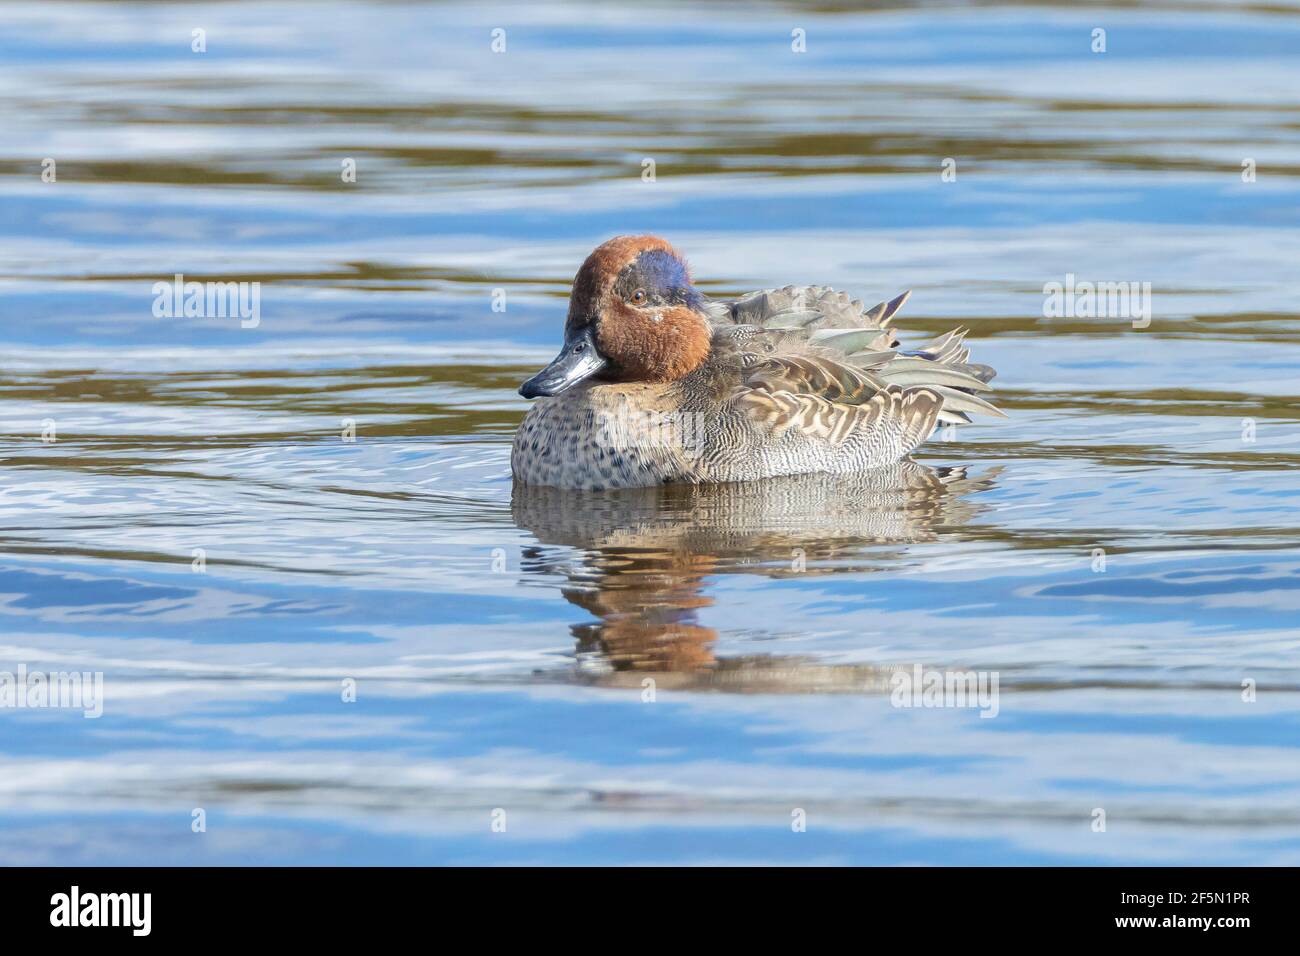 Eurasian teal, Anas crecca, common teal, or Eurasian green-winged teal waterfowl swimming Stock Photo